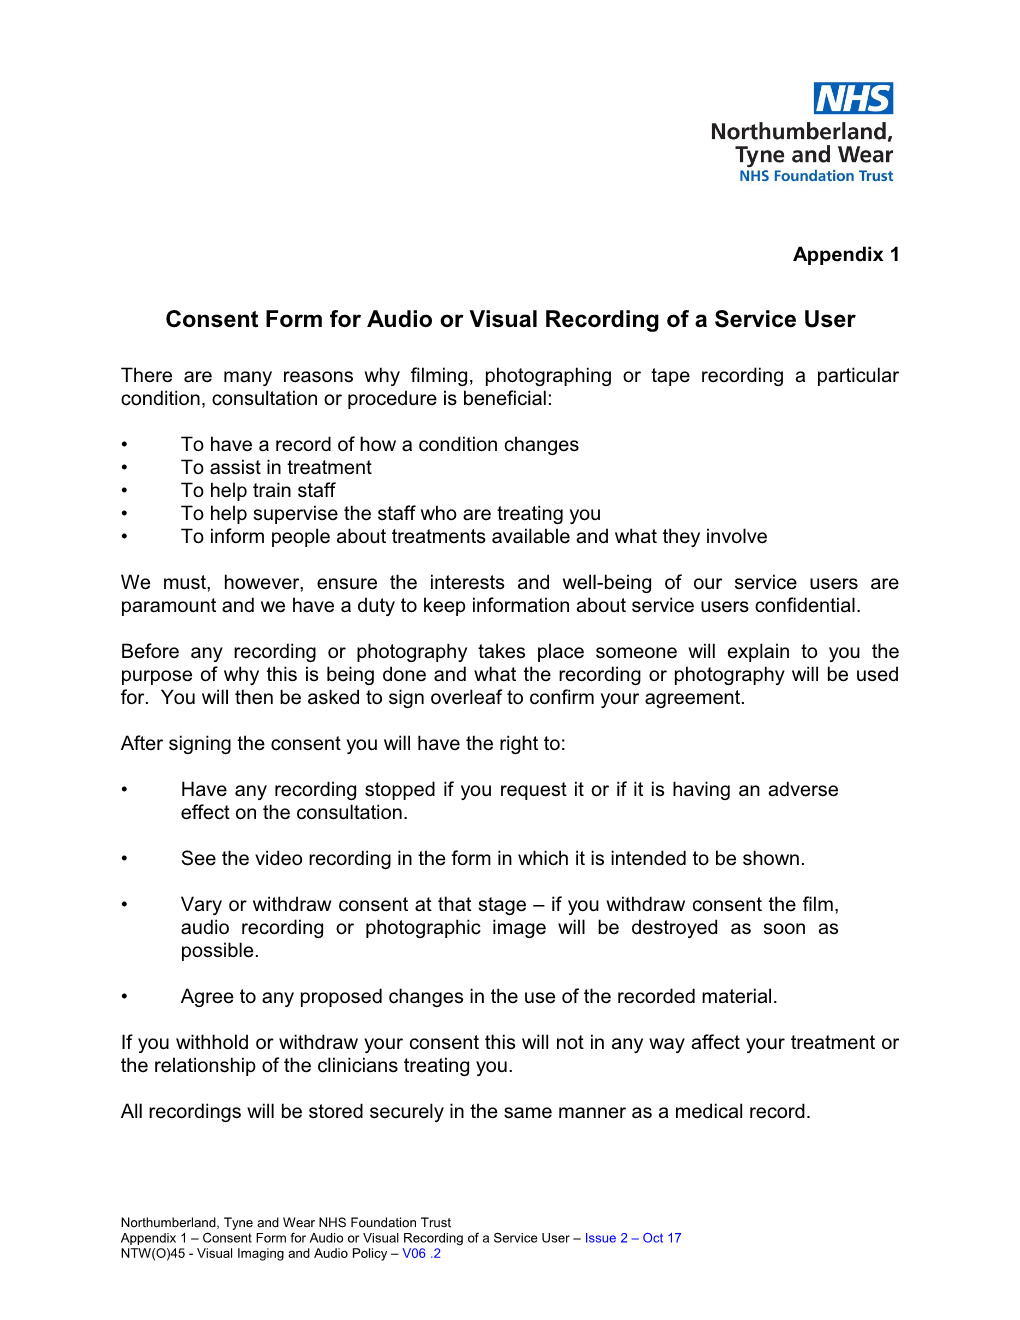 Consent Form for Audio Or Visual Recording of a Service User